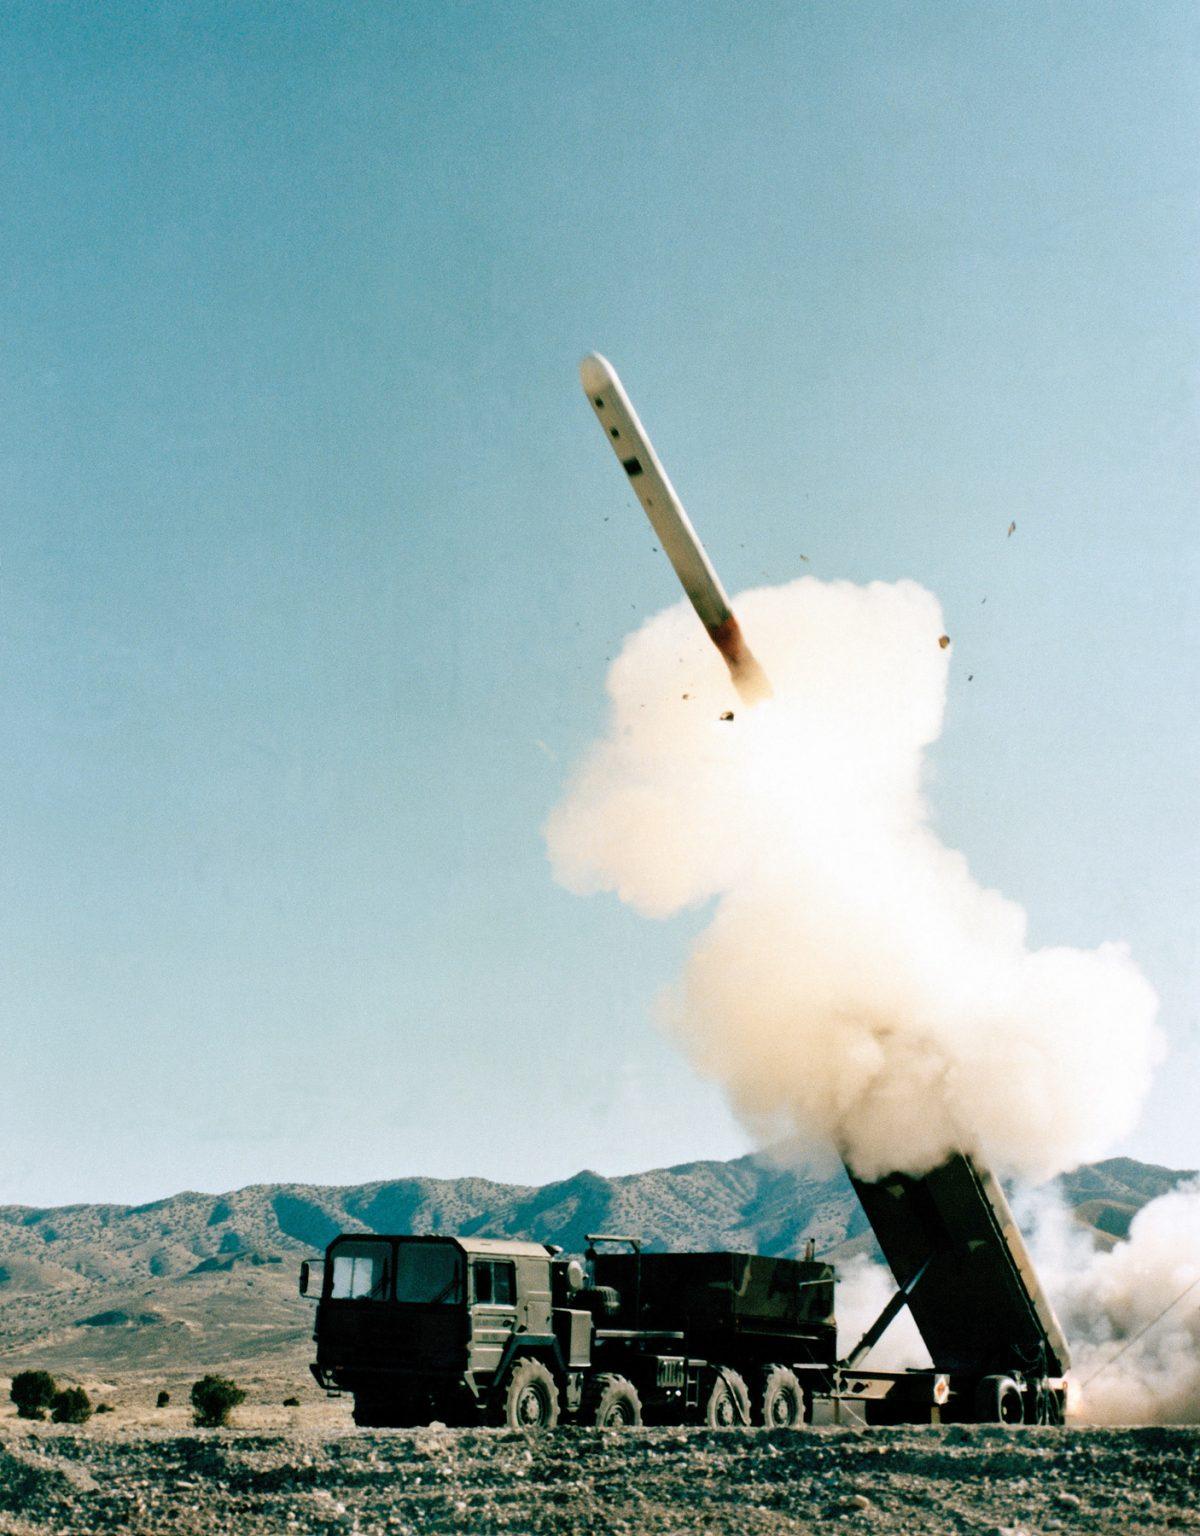 A Ground Launch Cruise Missile after it emerges from the Transporter-Erector Launcher during a test firing. The United States destroyed all of its ground-launched missiles and launchers to comply with the INF treaty. The United States exited the treaty on Aug. 2, 2019, and plans to develop and deploy the missiles to deter China. (Air Force/Public Domain)